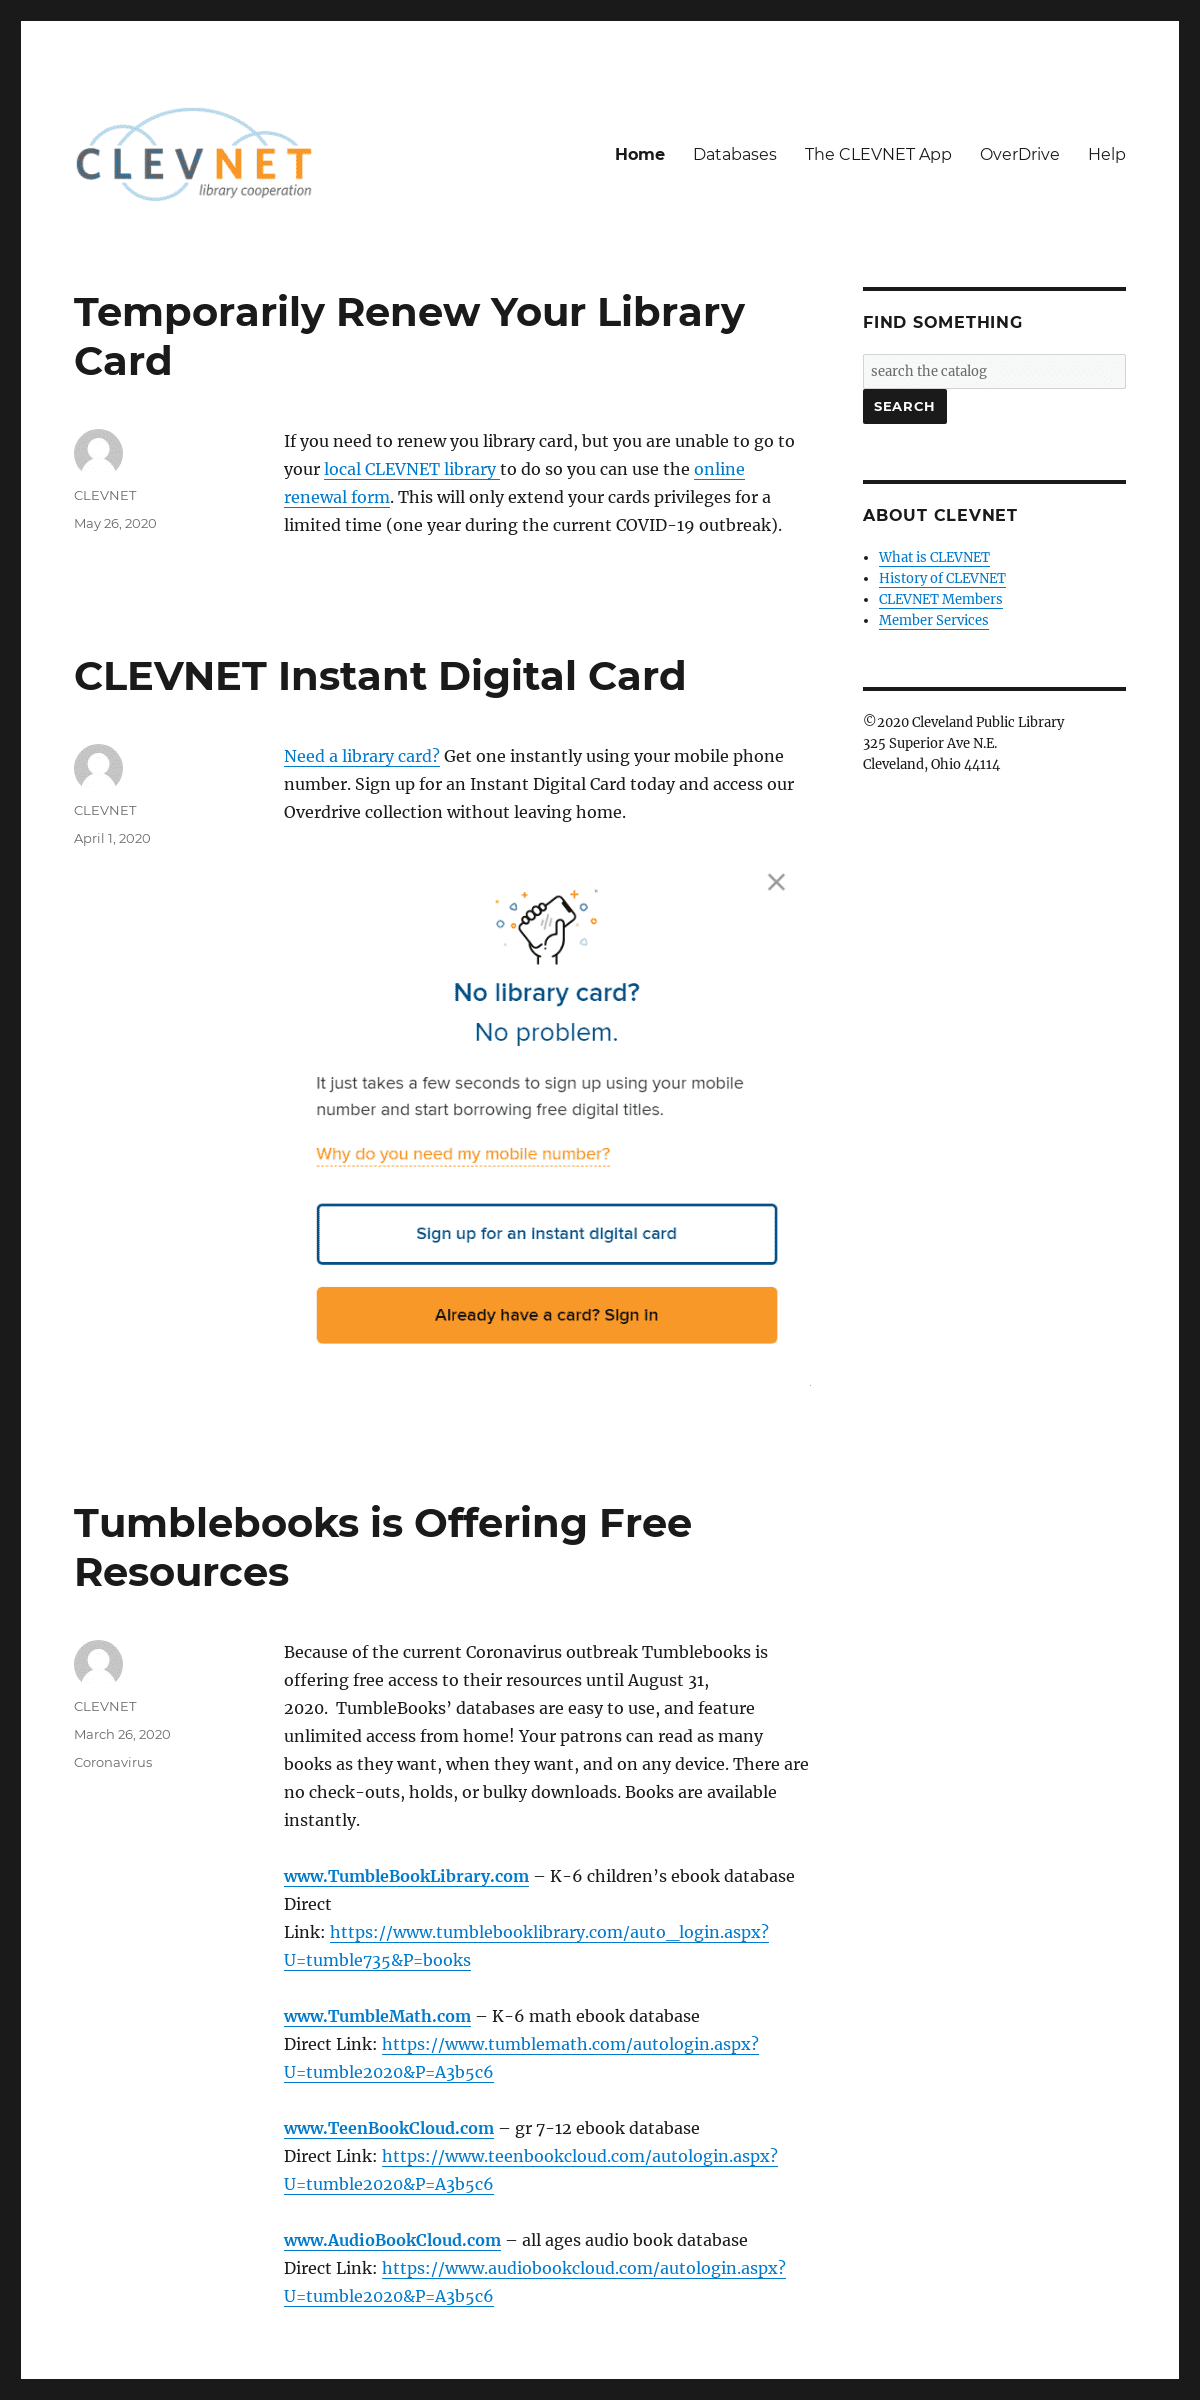 A complete backup of clevnet.org